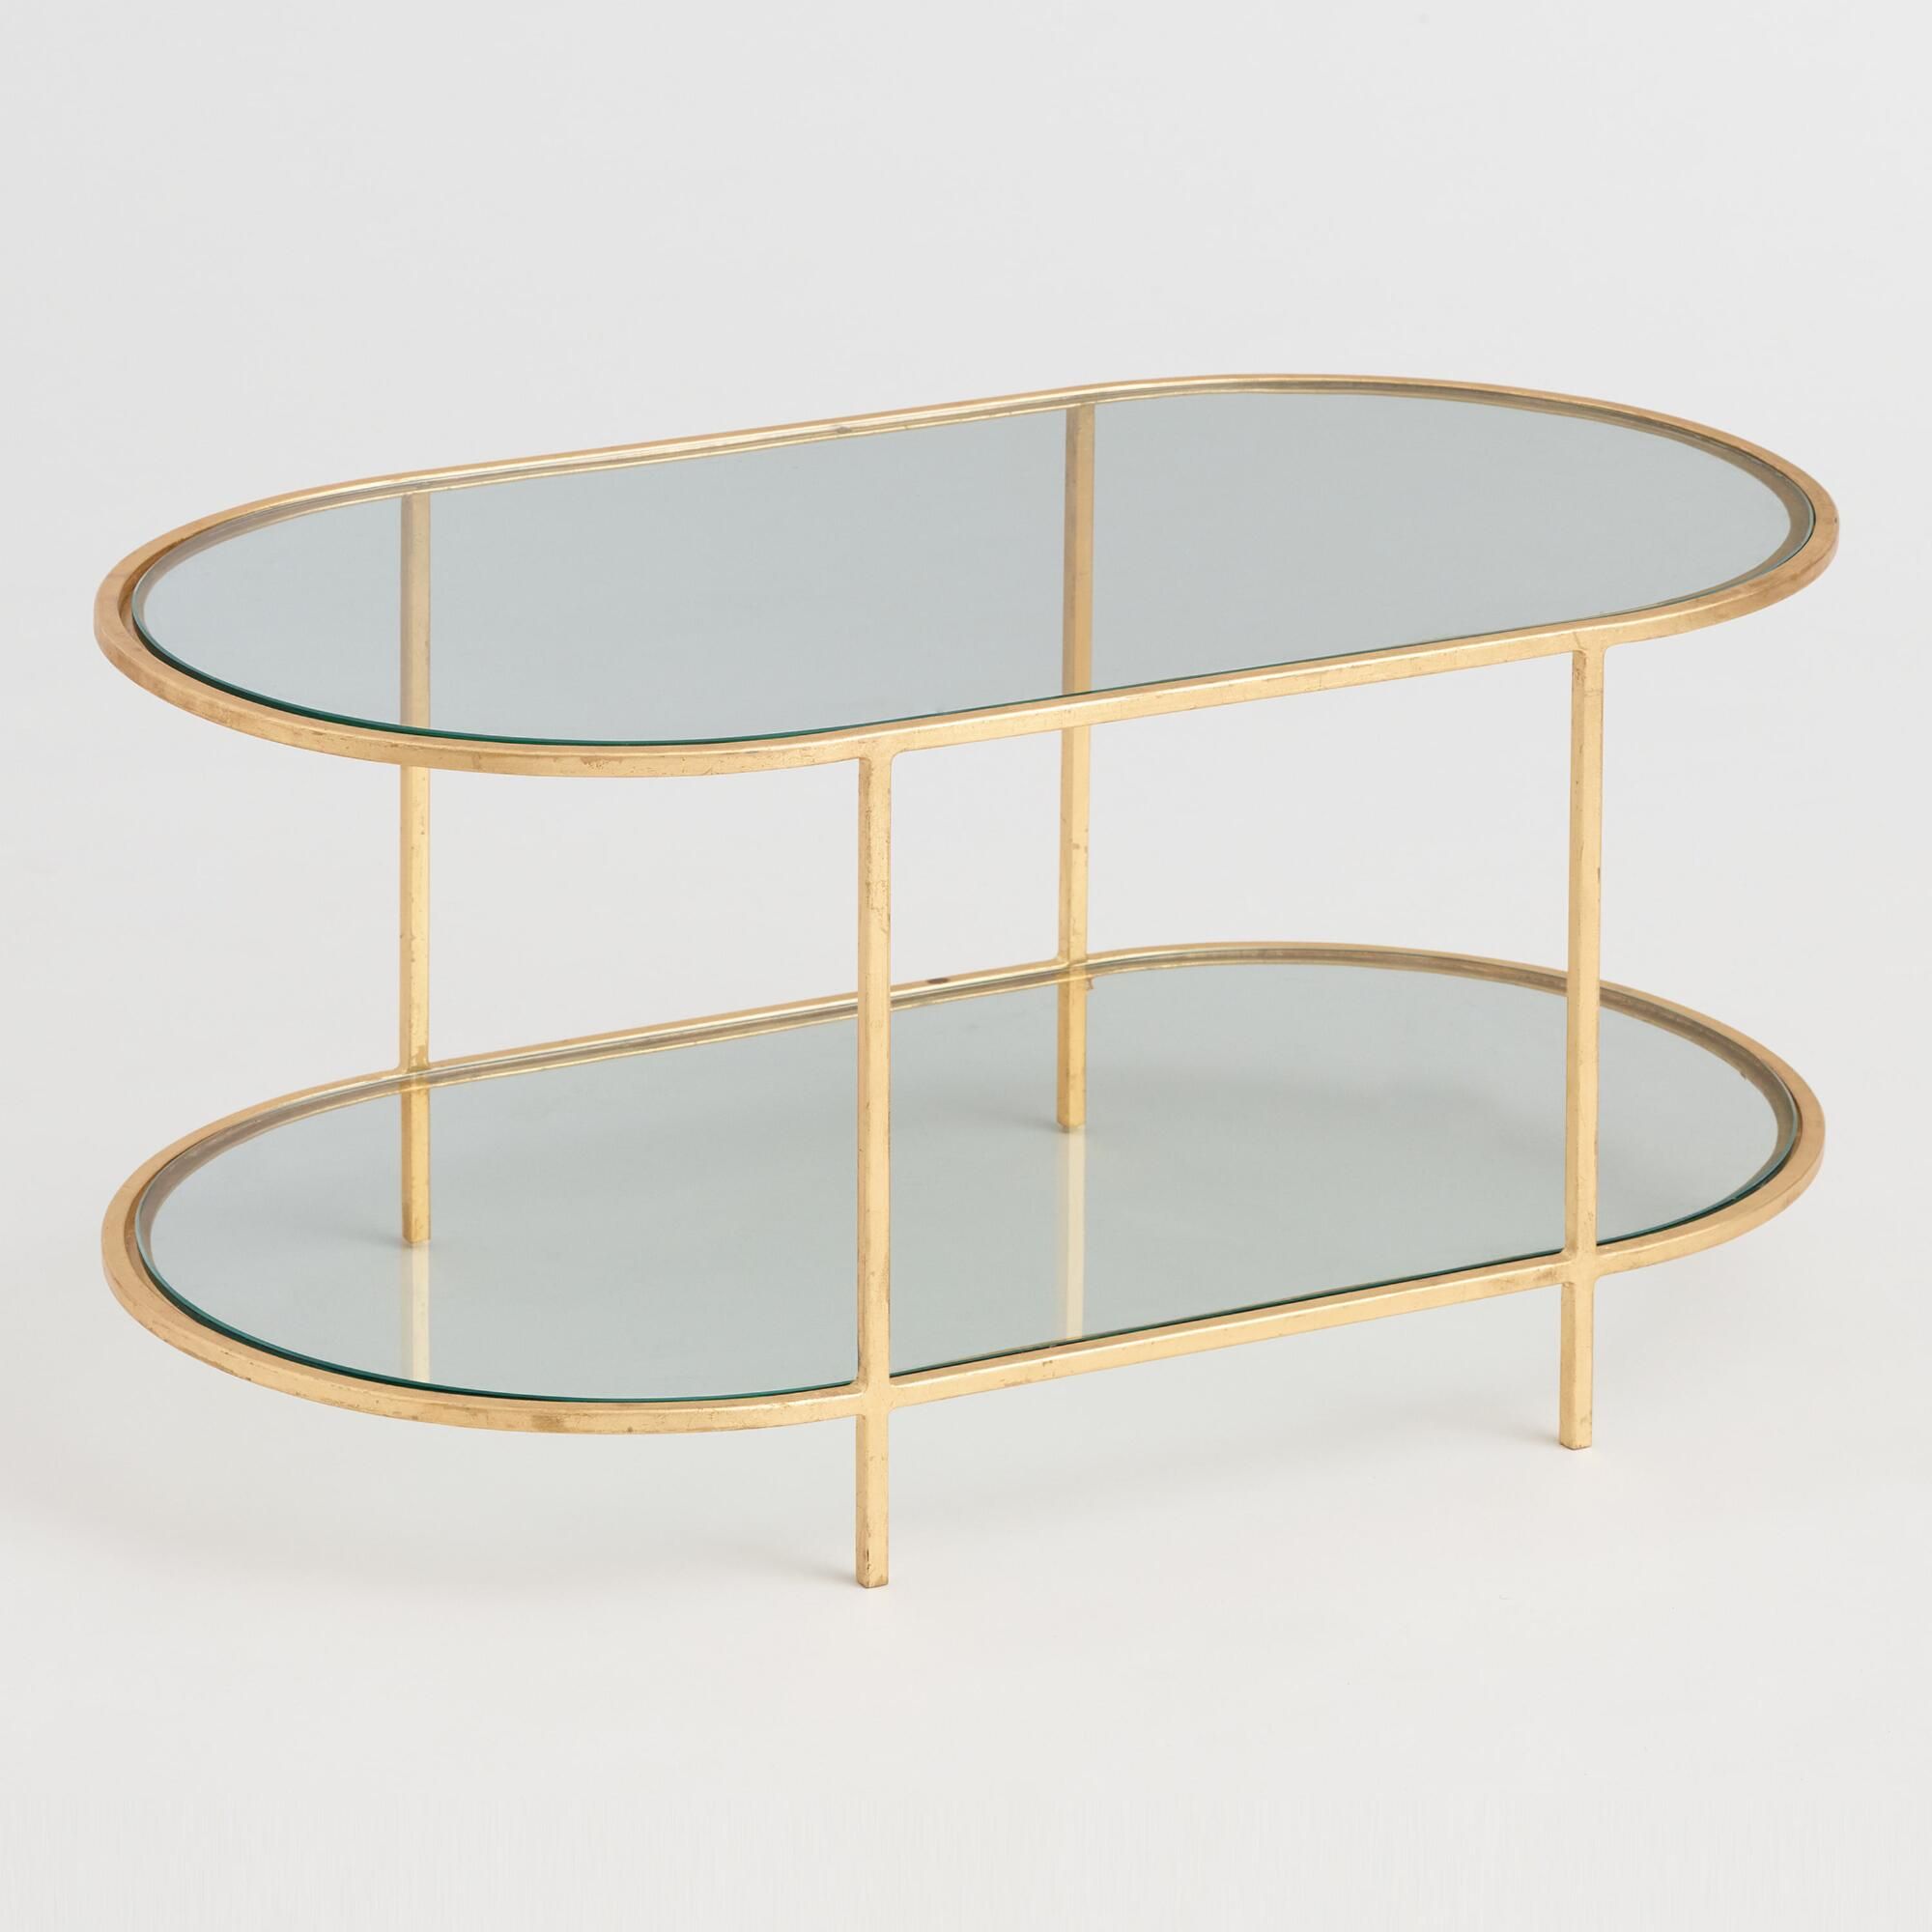 Glass Gold Leaf Coffee Table Oval – Katie Considers Within Leaf Round Coffee Tables (View 4 of 15)